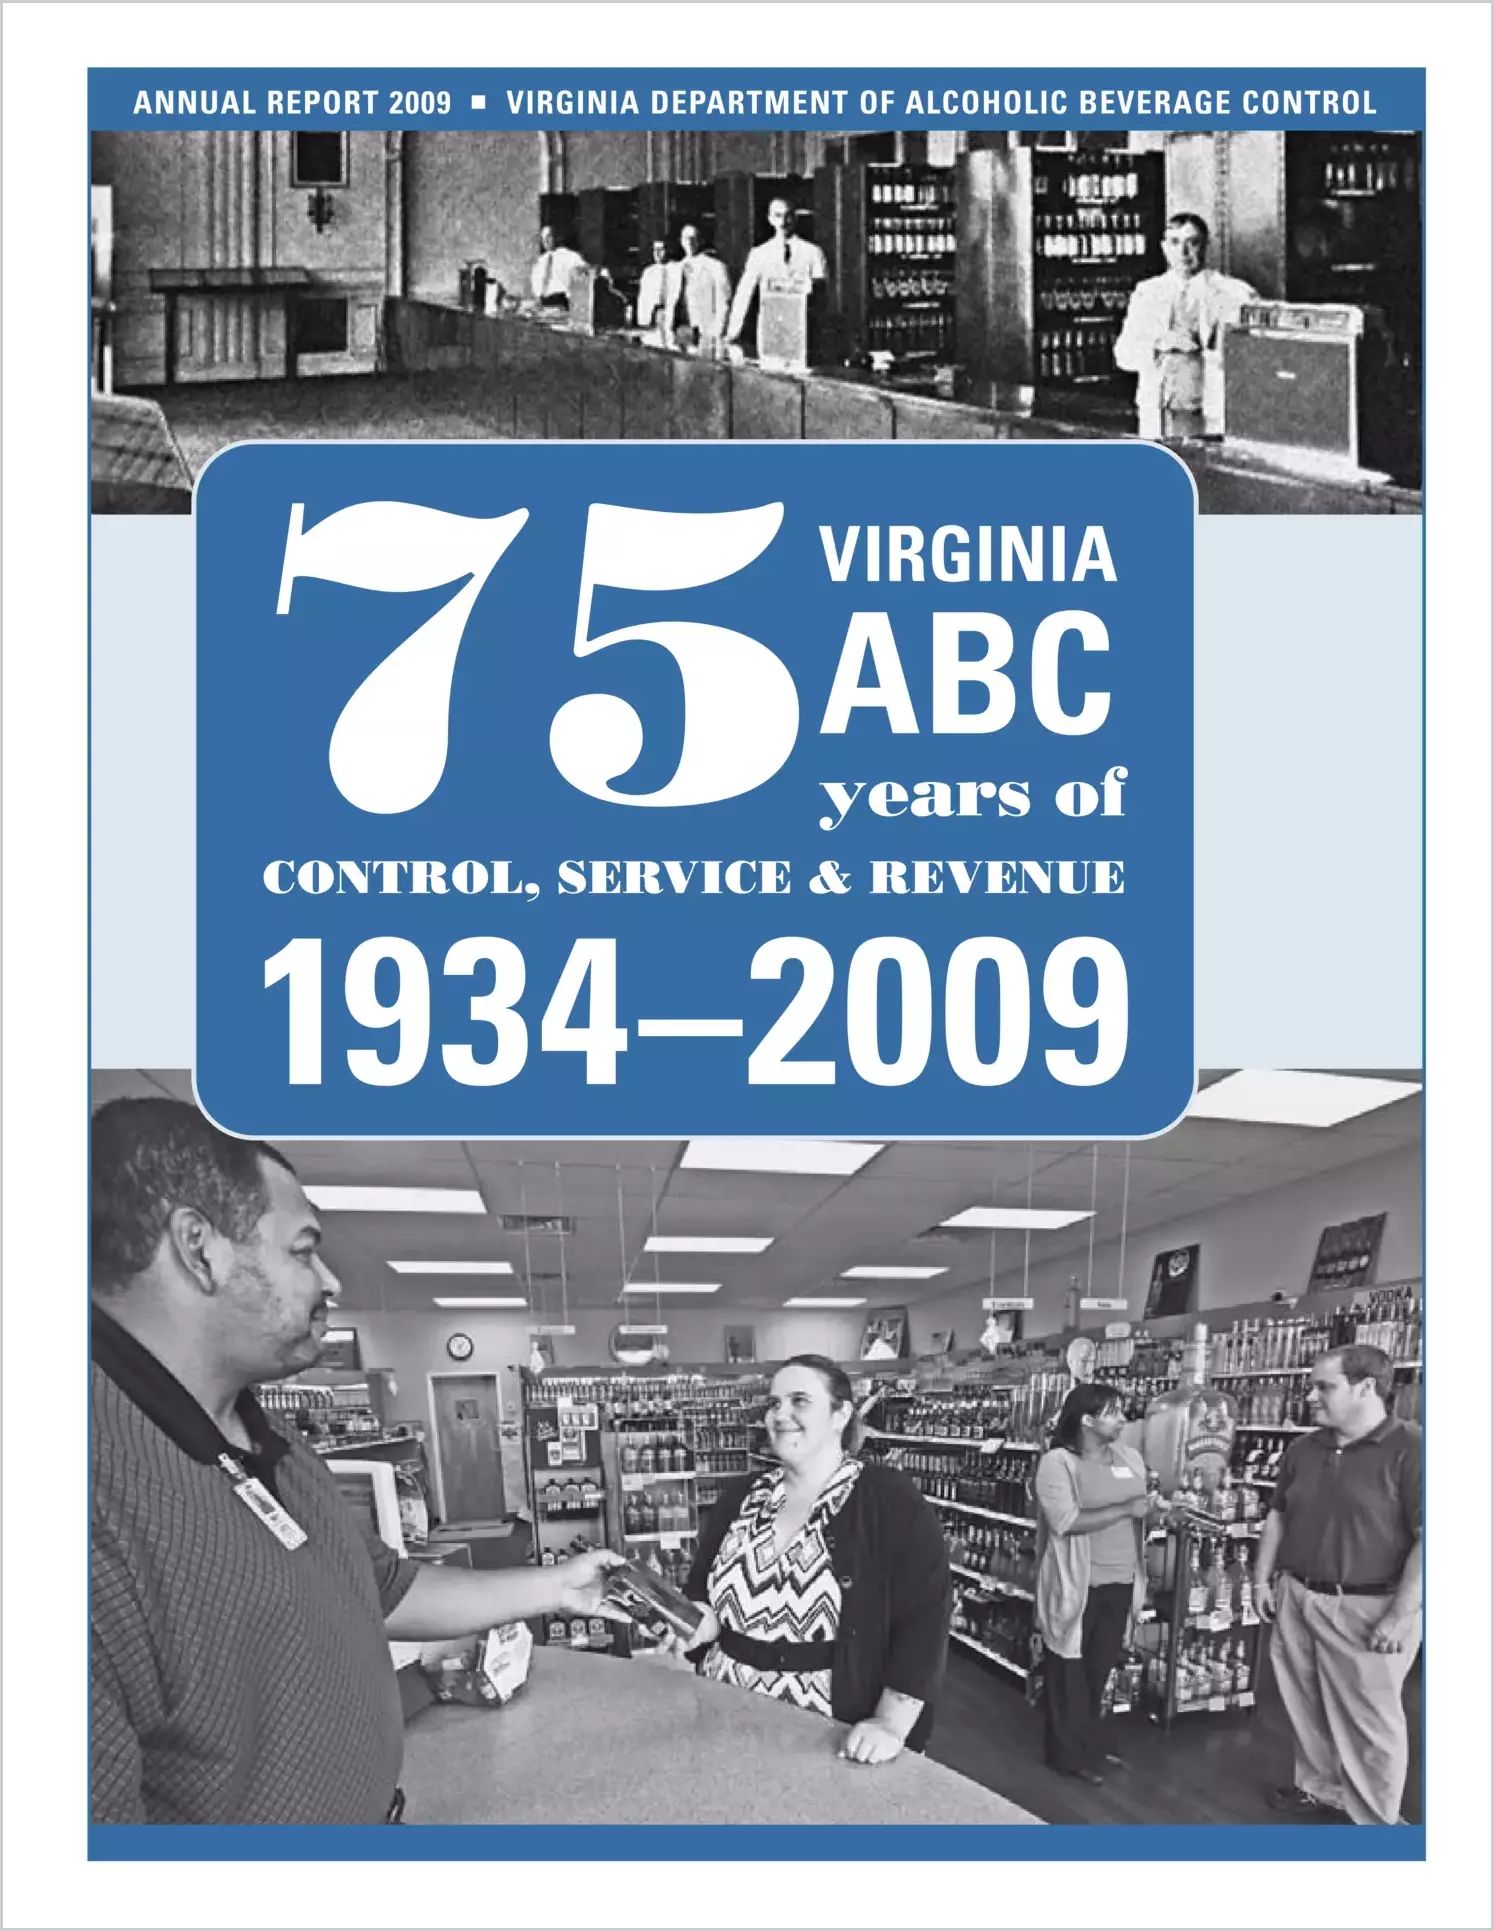 Department of Alcoholic Beverage Control Annual Report 2009